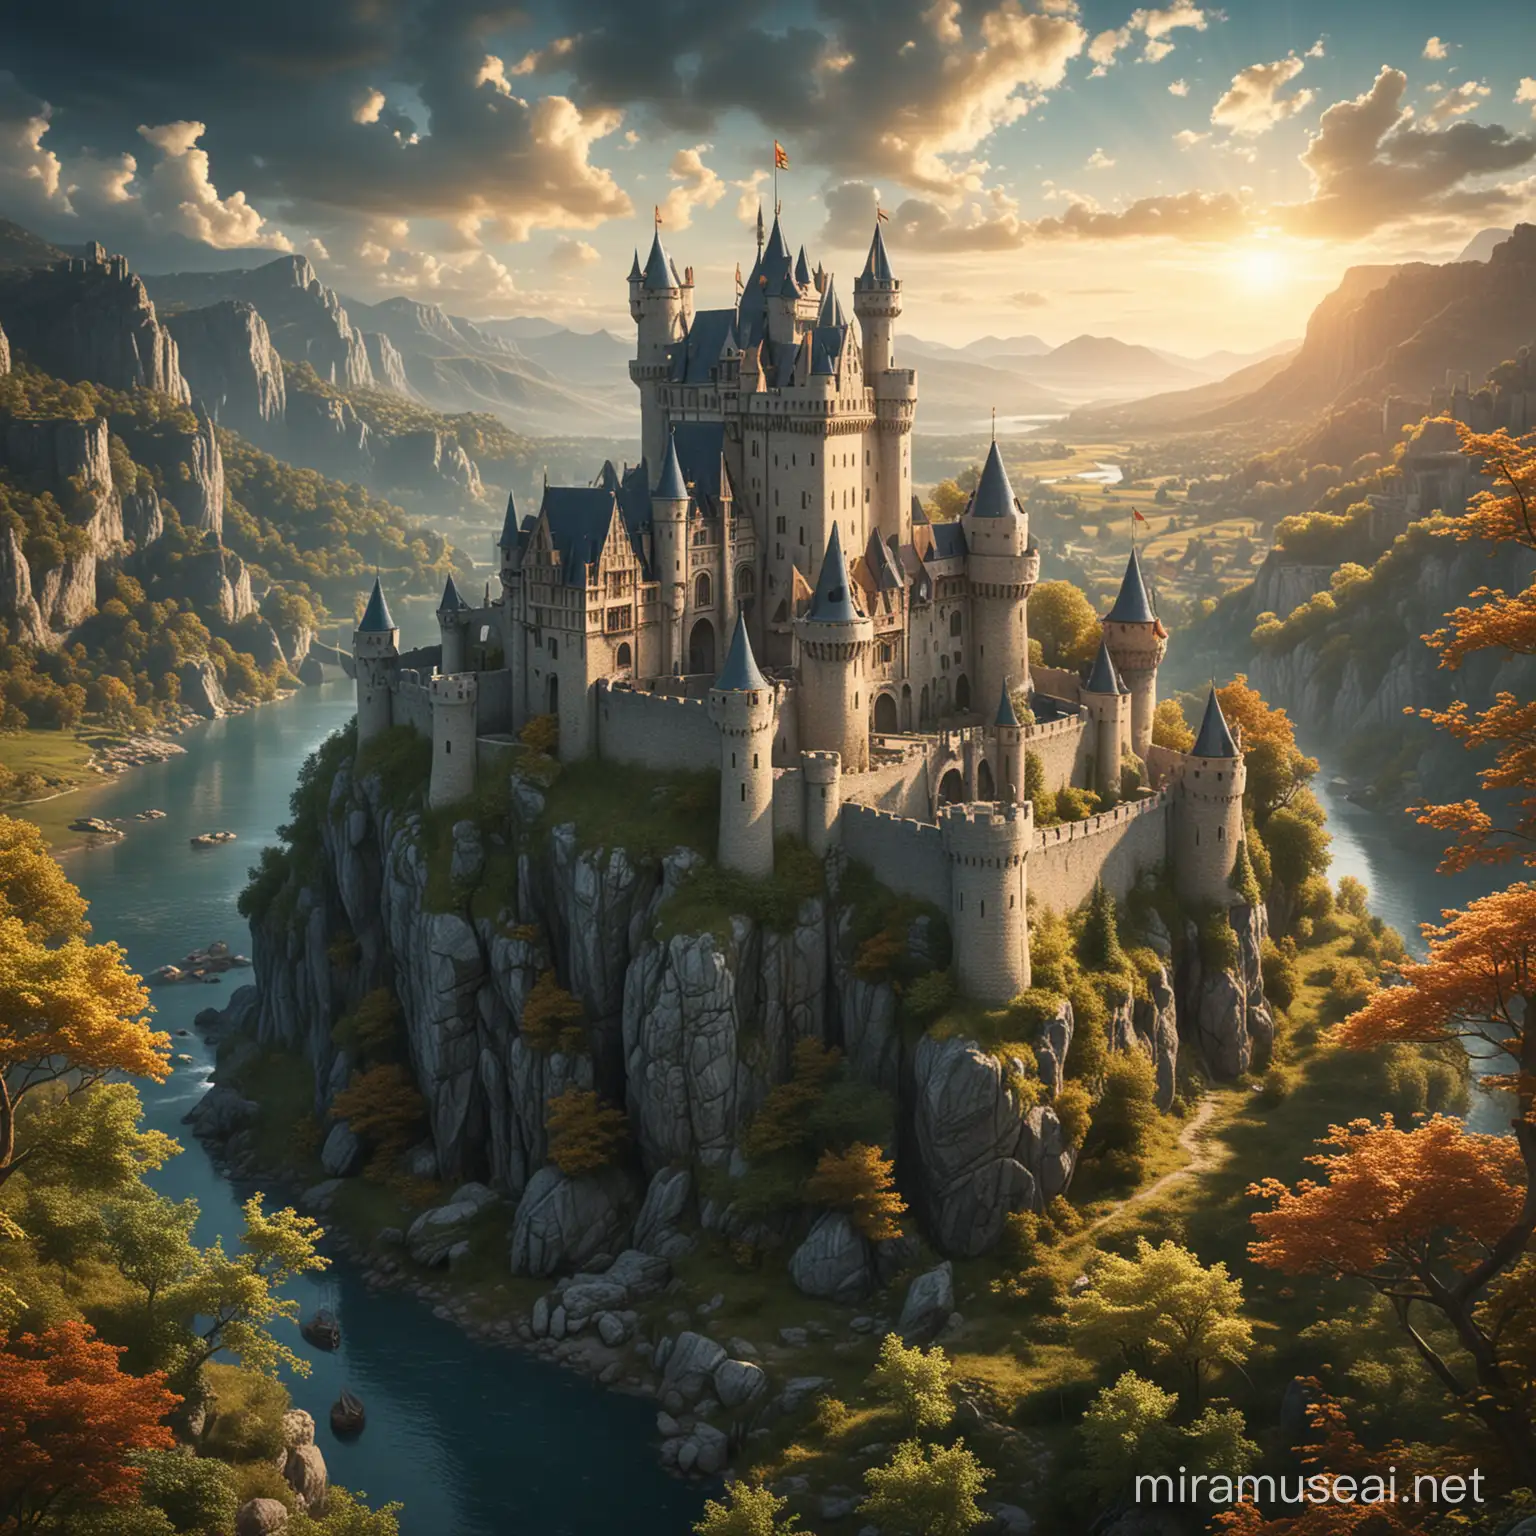 a medieval castle in a beautiful kingdom in a world of magic and mystery